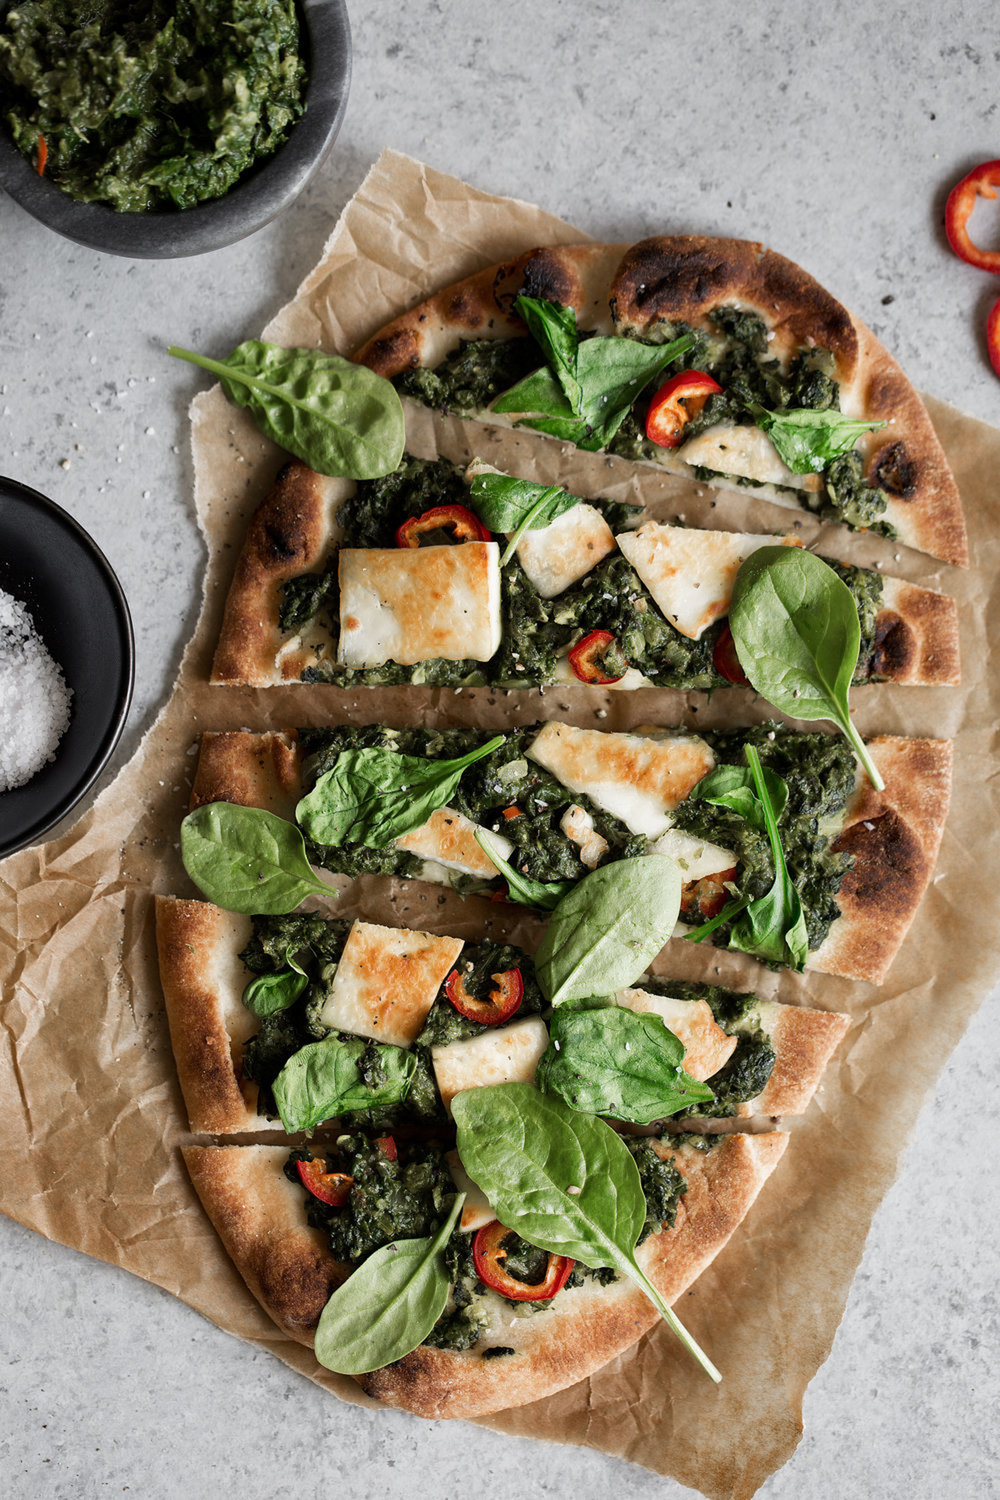 saag paneer naan pizza recipe from cooking with cocktail rings